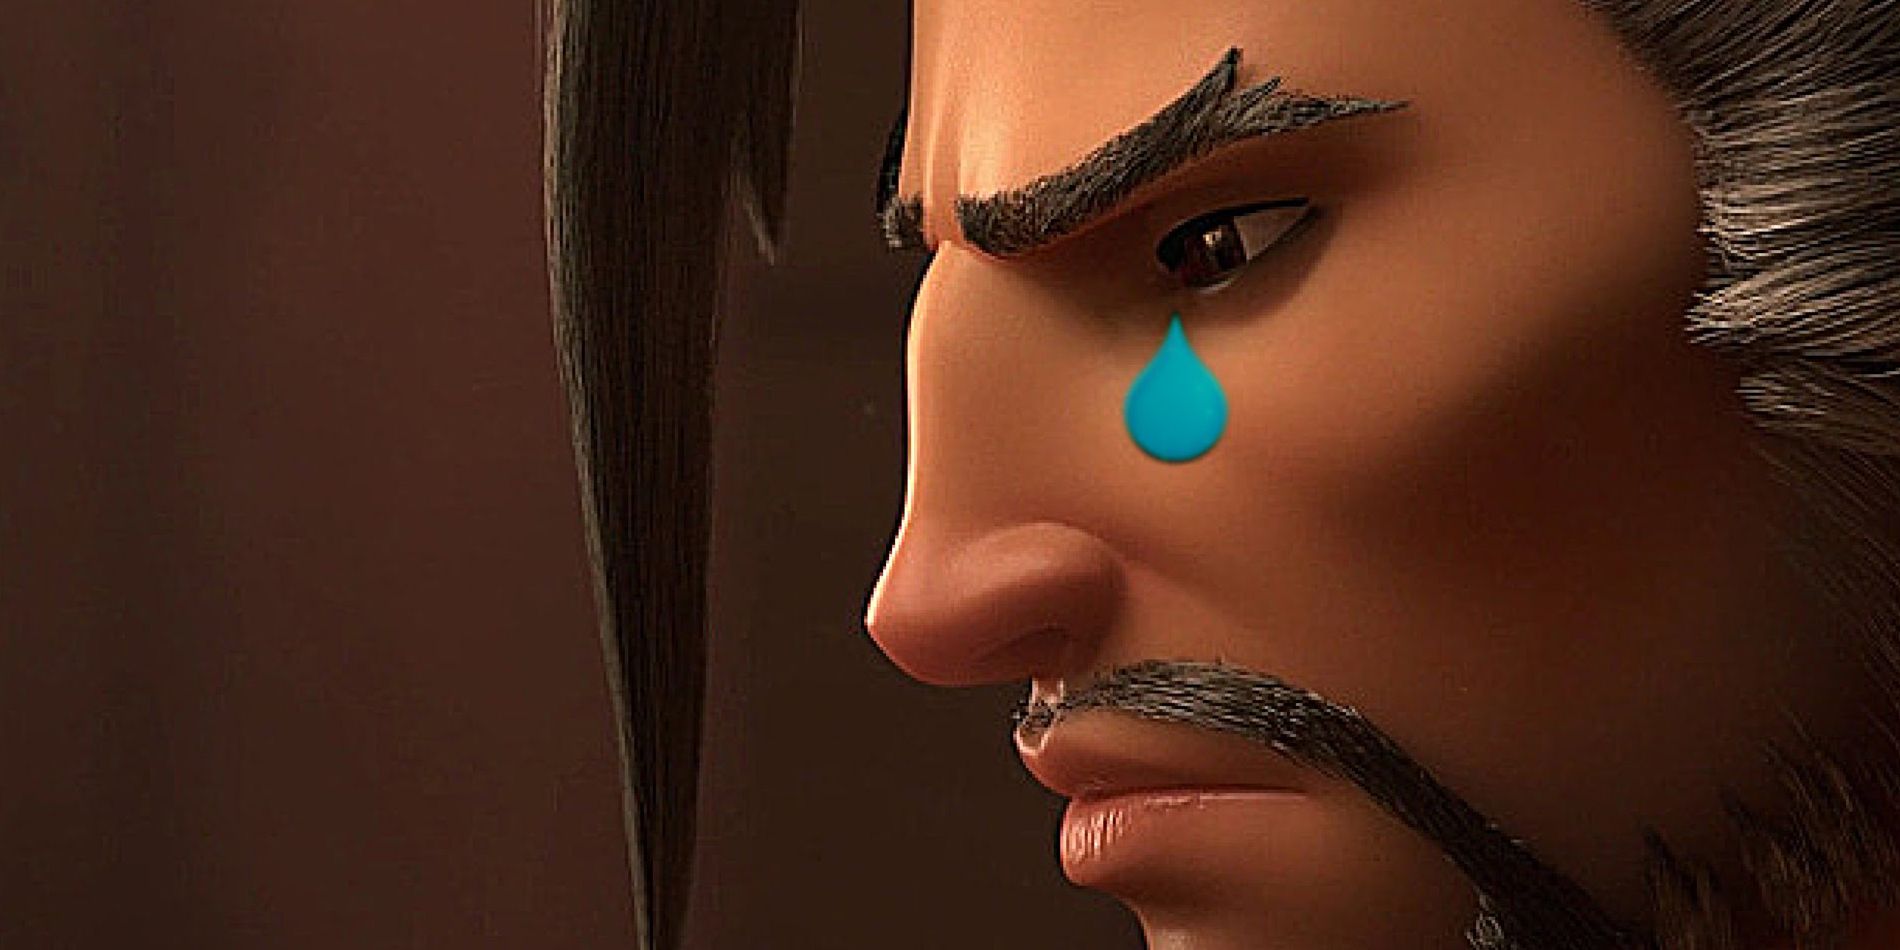 Overwatch 15 Things You Never Knew About Hanzo